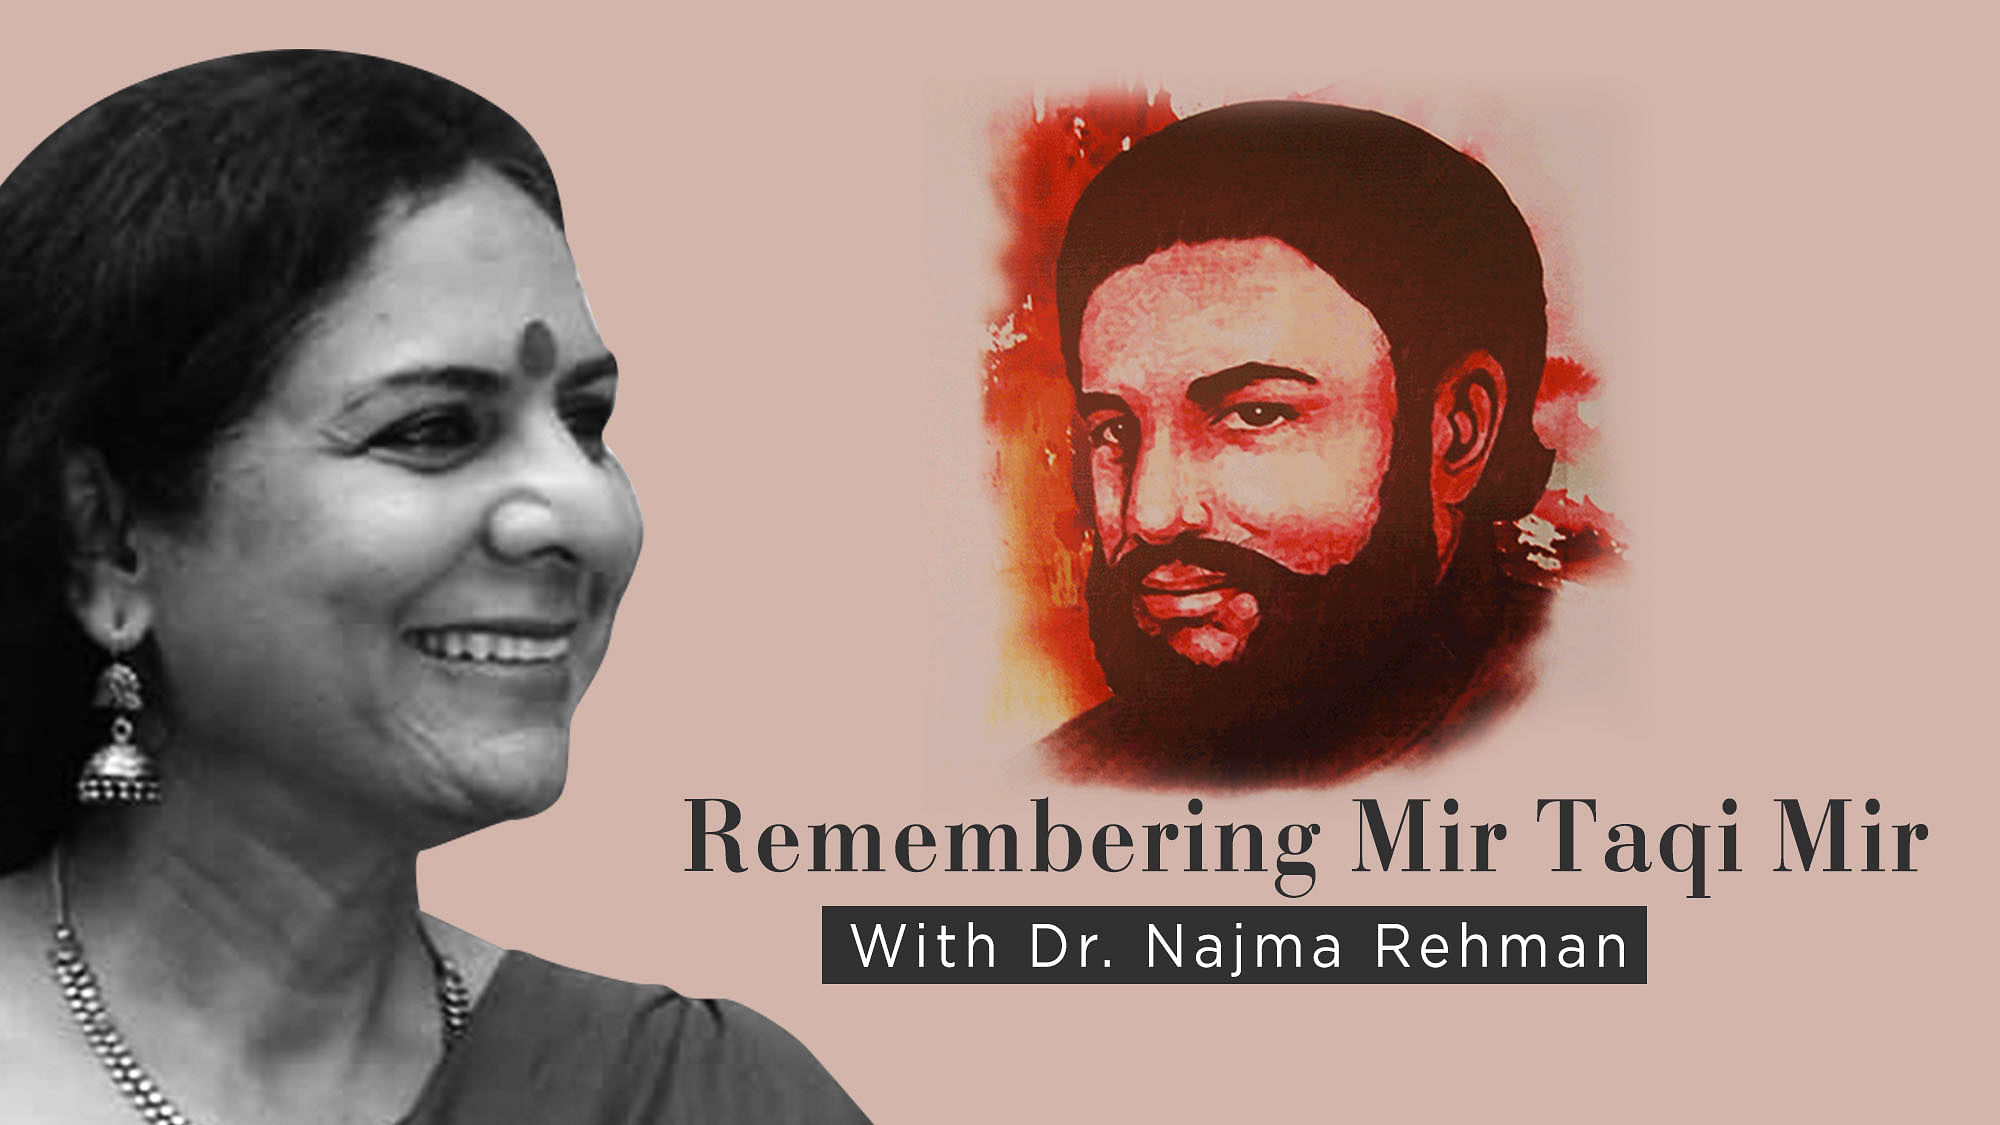 DU professor Dr Najma Rehmani gives The Quint’s Fabeha Syed a master class on Mir Taqi Mir’s poetry that sums up 18th Century Delhi with his politics, love and loss.